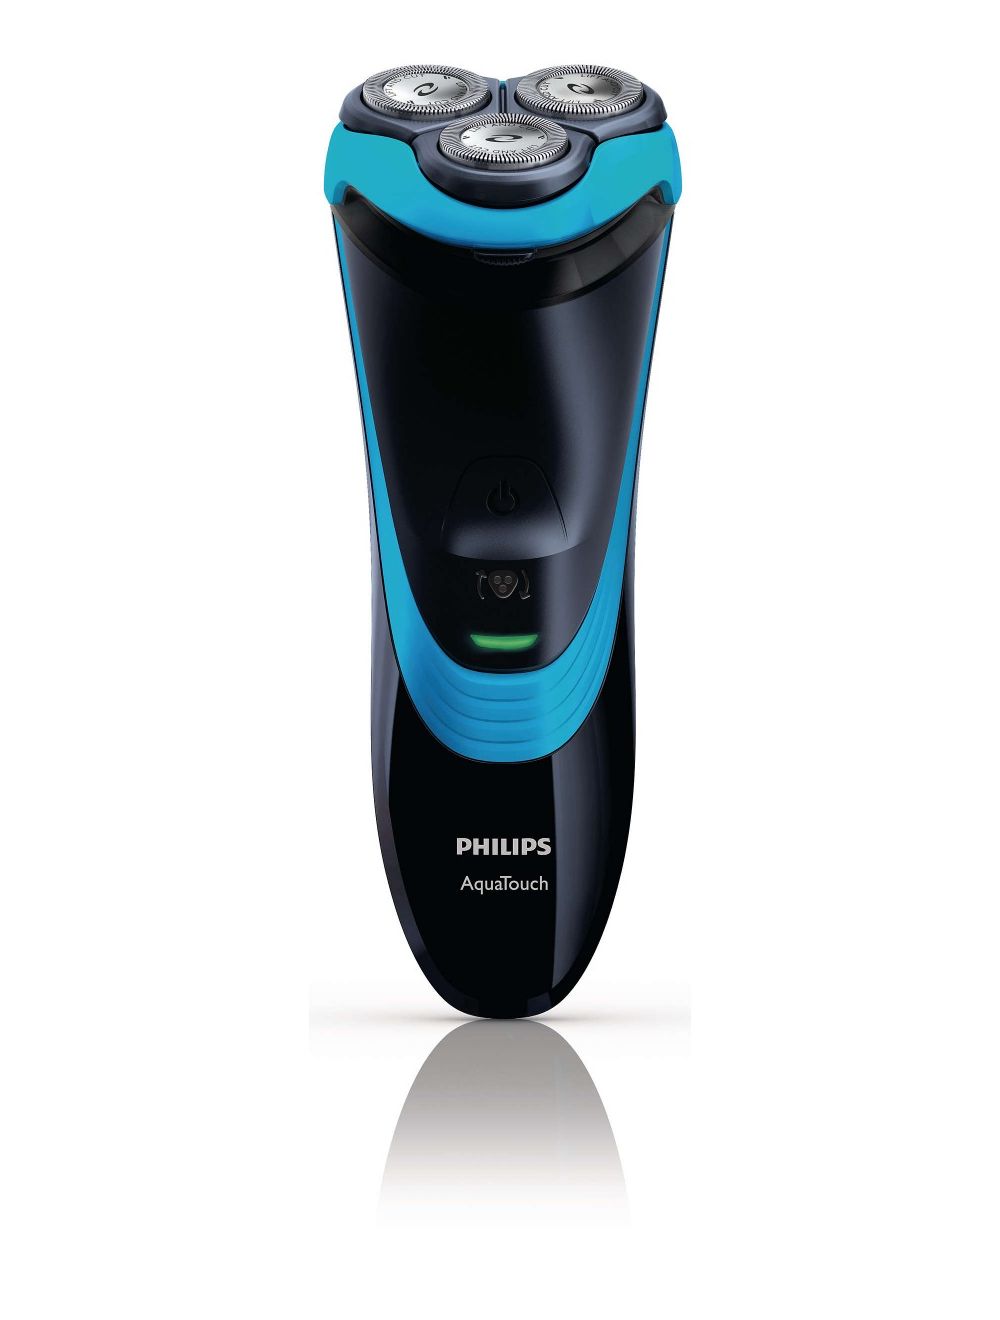 Philips AquaTouch Wet and Dry Electric Shaver (AT756/16)